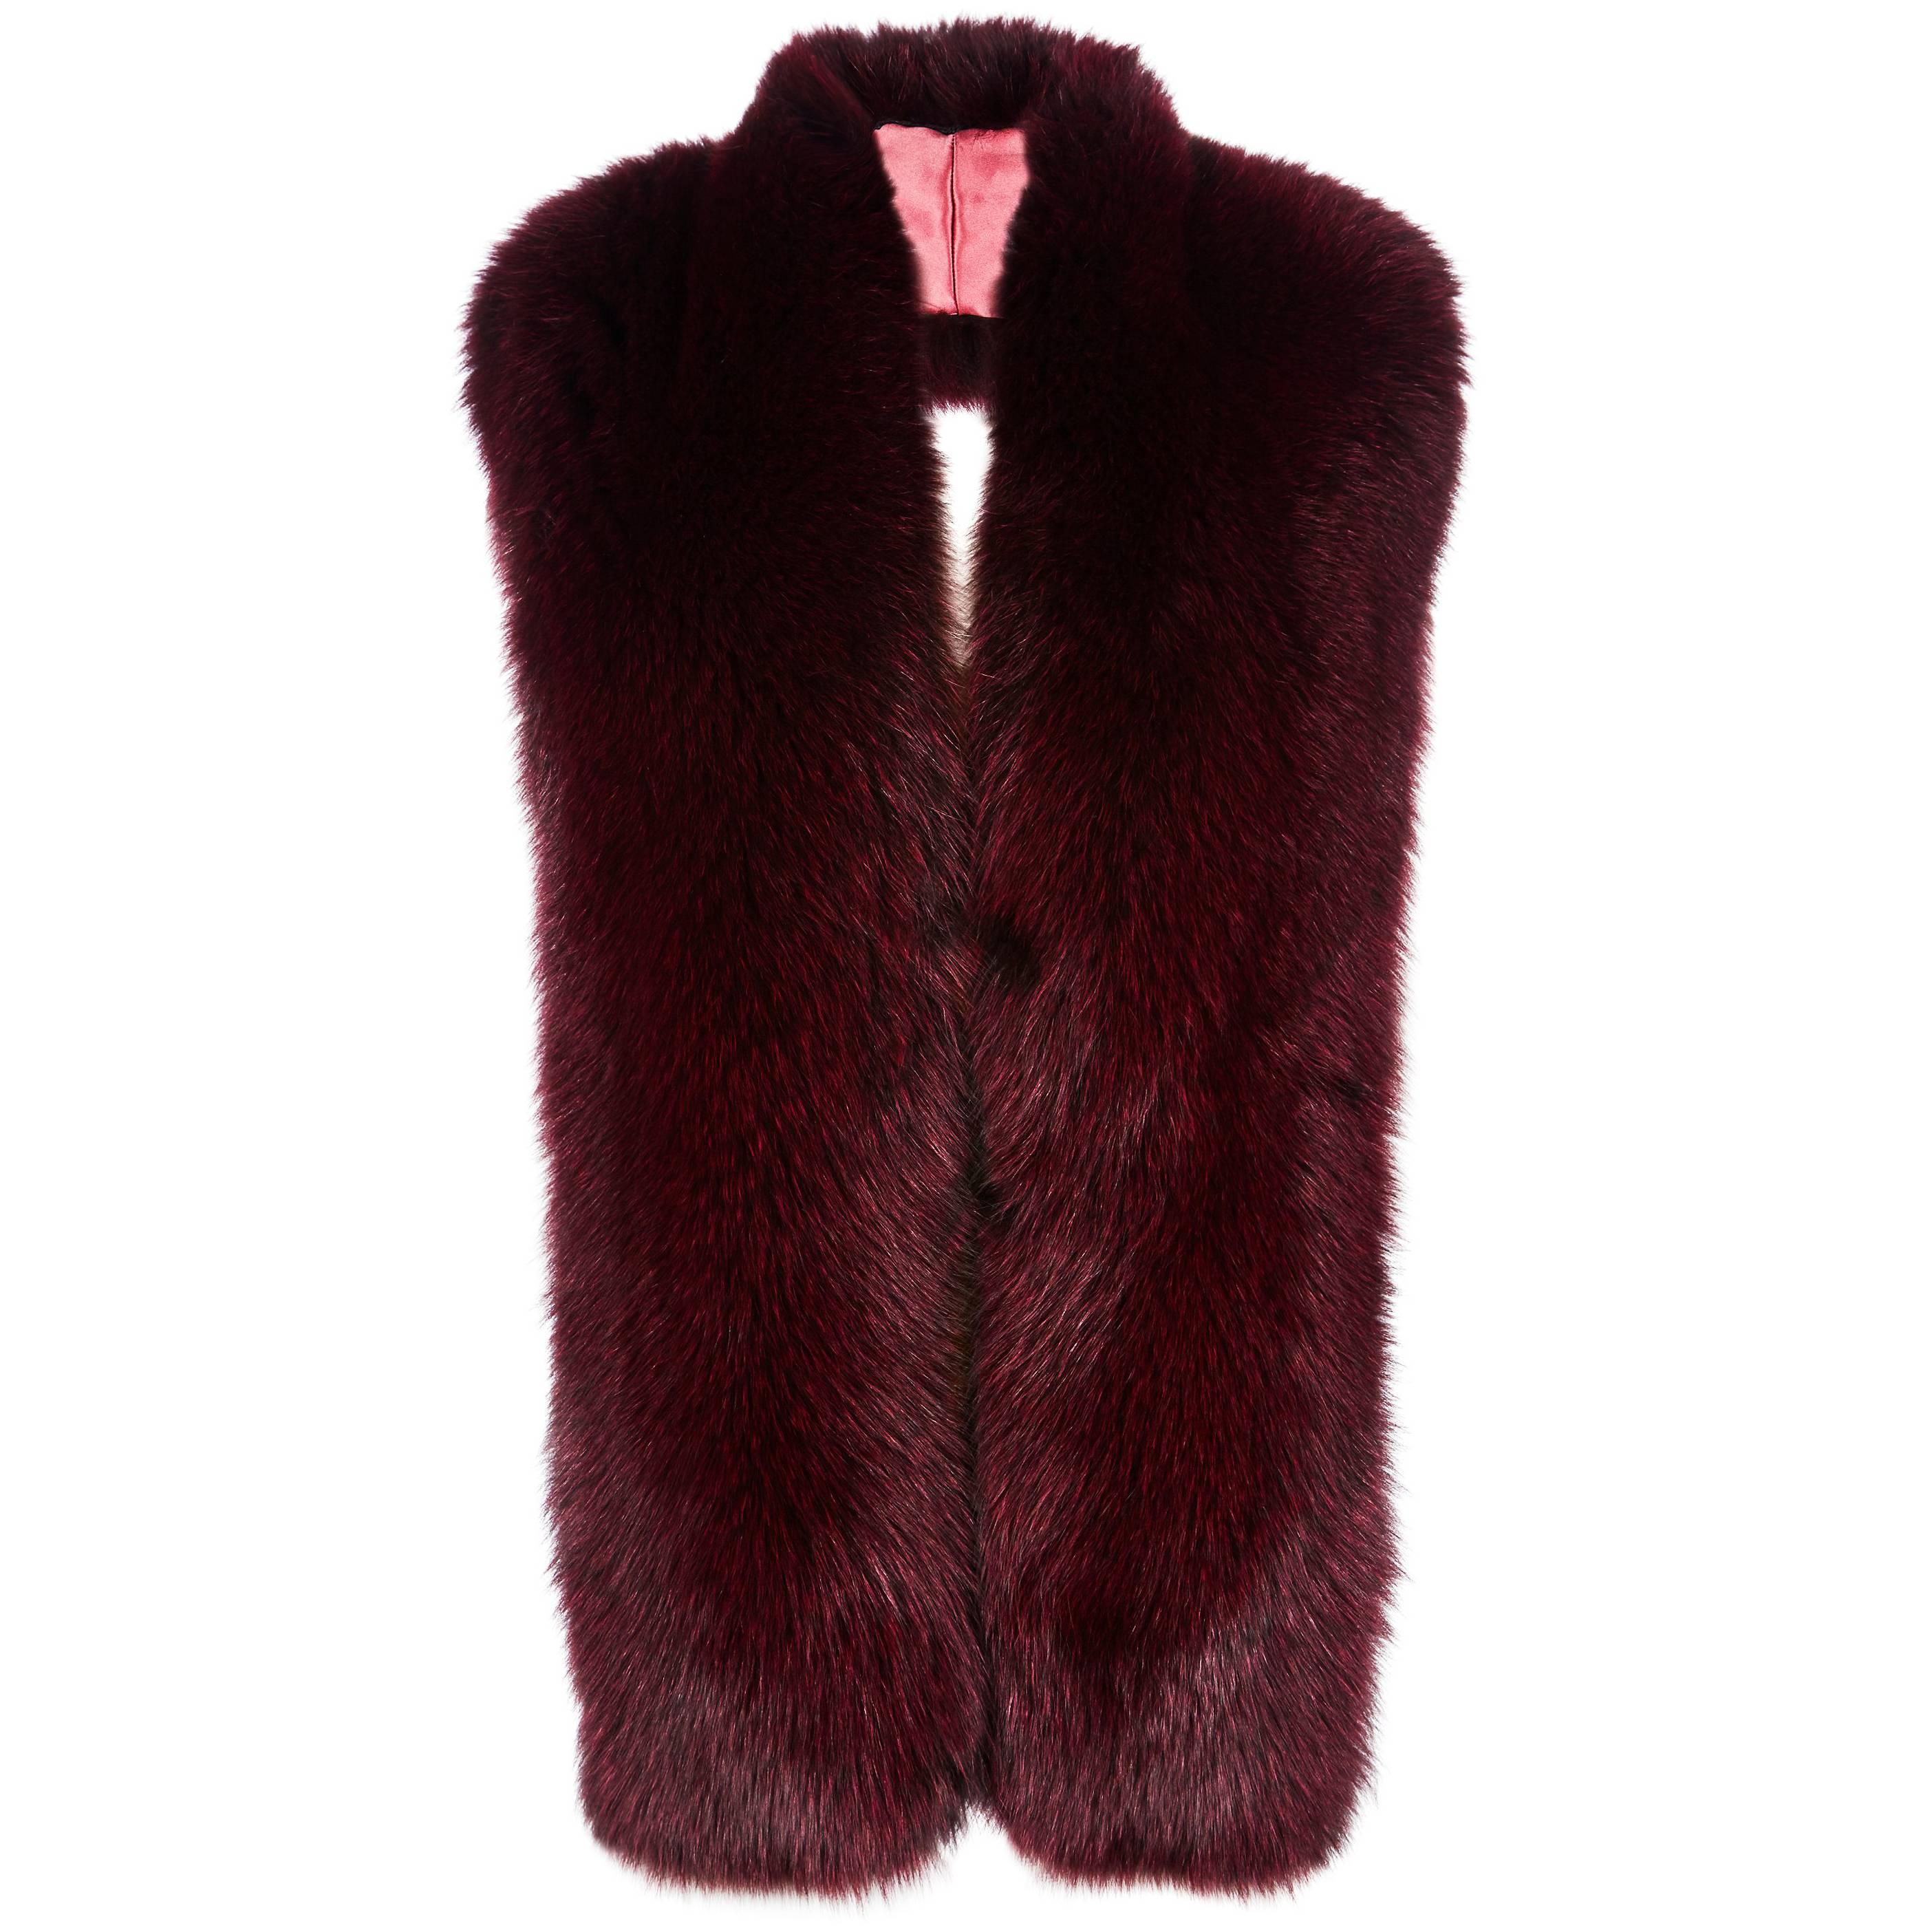 Verheyen London Legacy Stole in Garnet Burgundy Fox Fur - Valentines Gift

Brand New (RRP Price)

The Legacy Stole is Verheyen London’s versatile design to be worn from day to night. Crafted in the finest dyed fox fur and lined in coloured silk